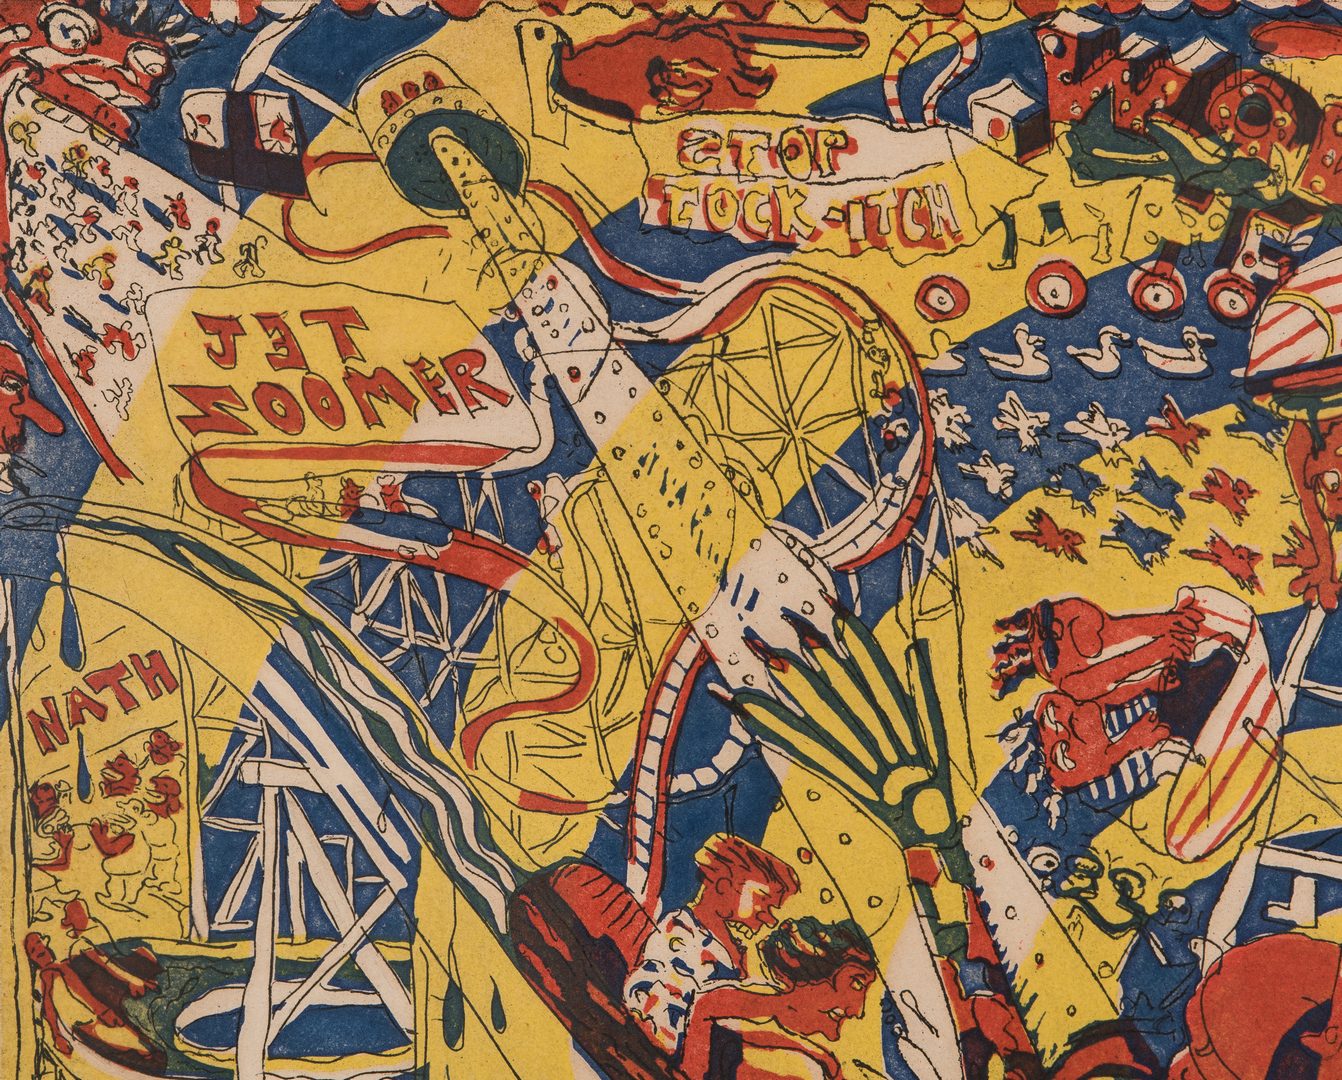 Lot 549: 2 Red Grooms Works on Paper, incl. Coney Island